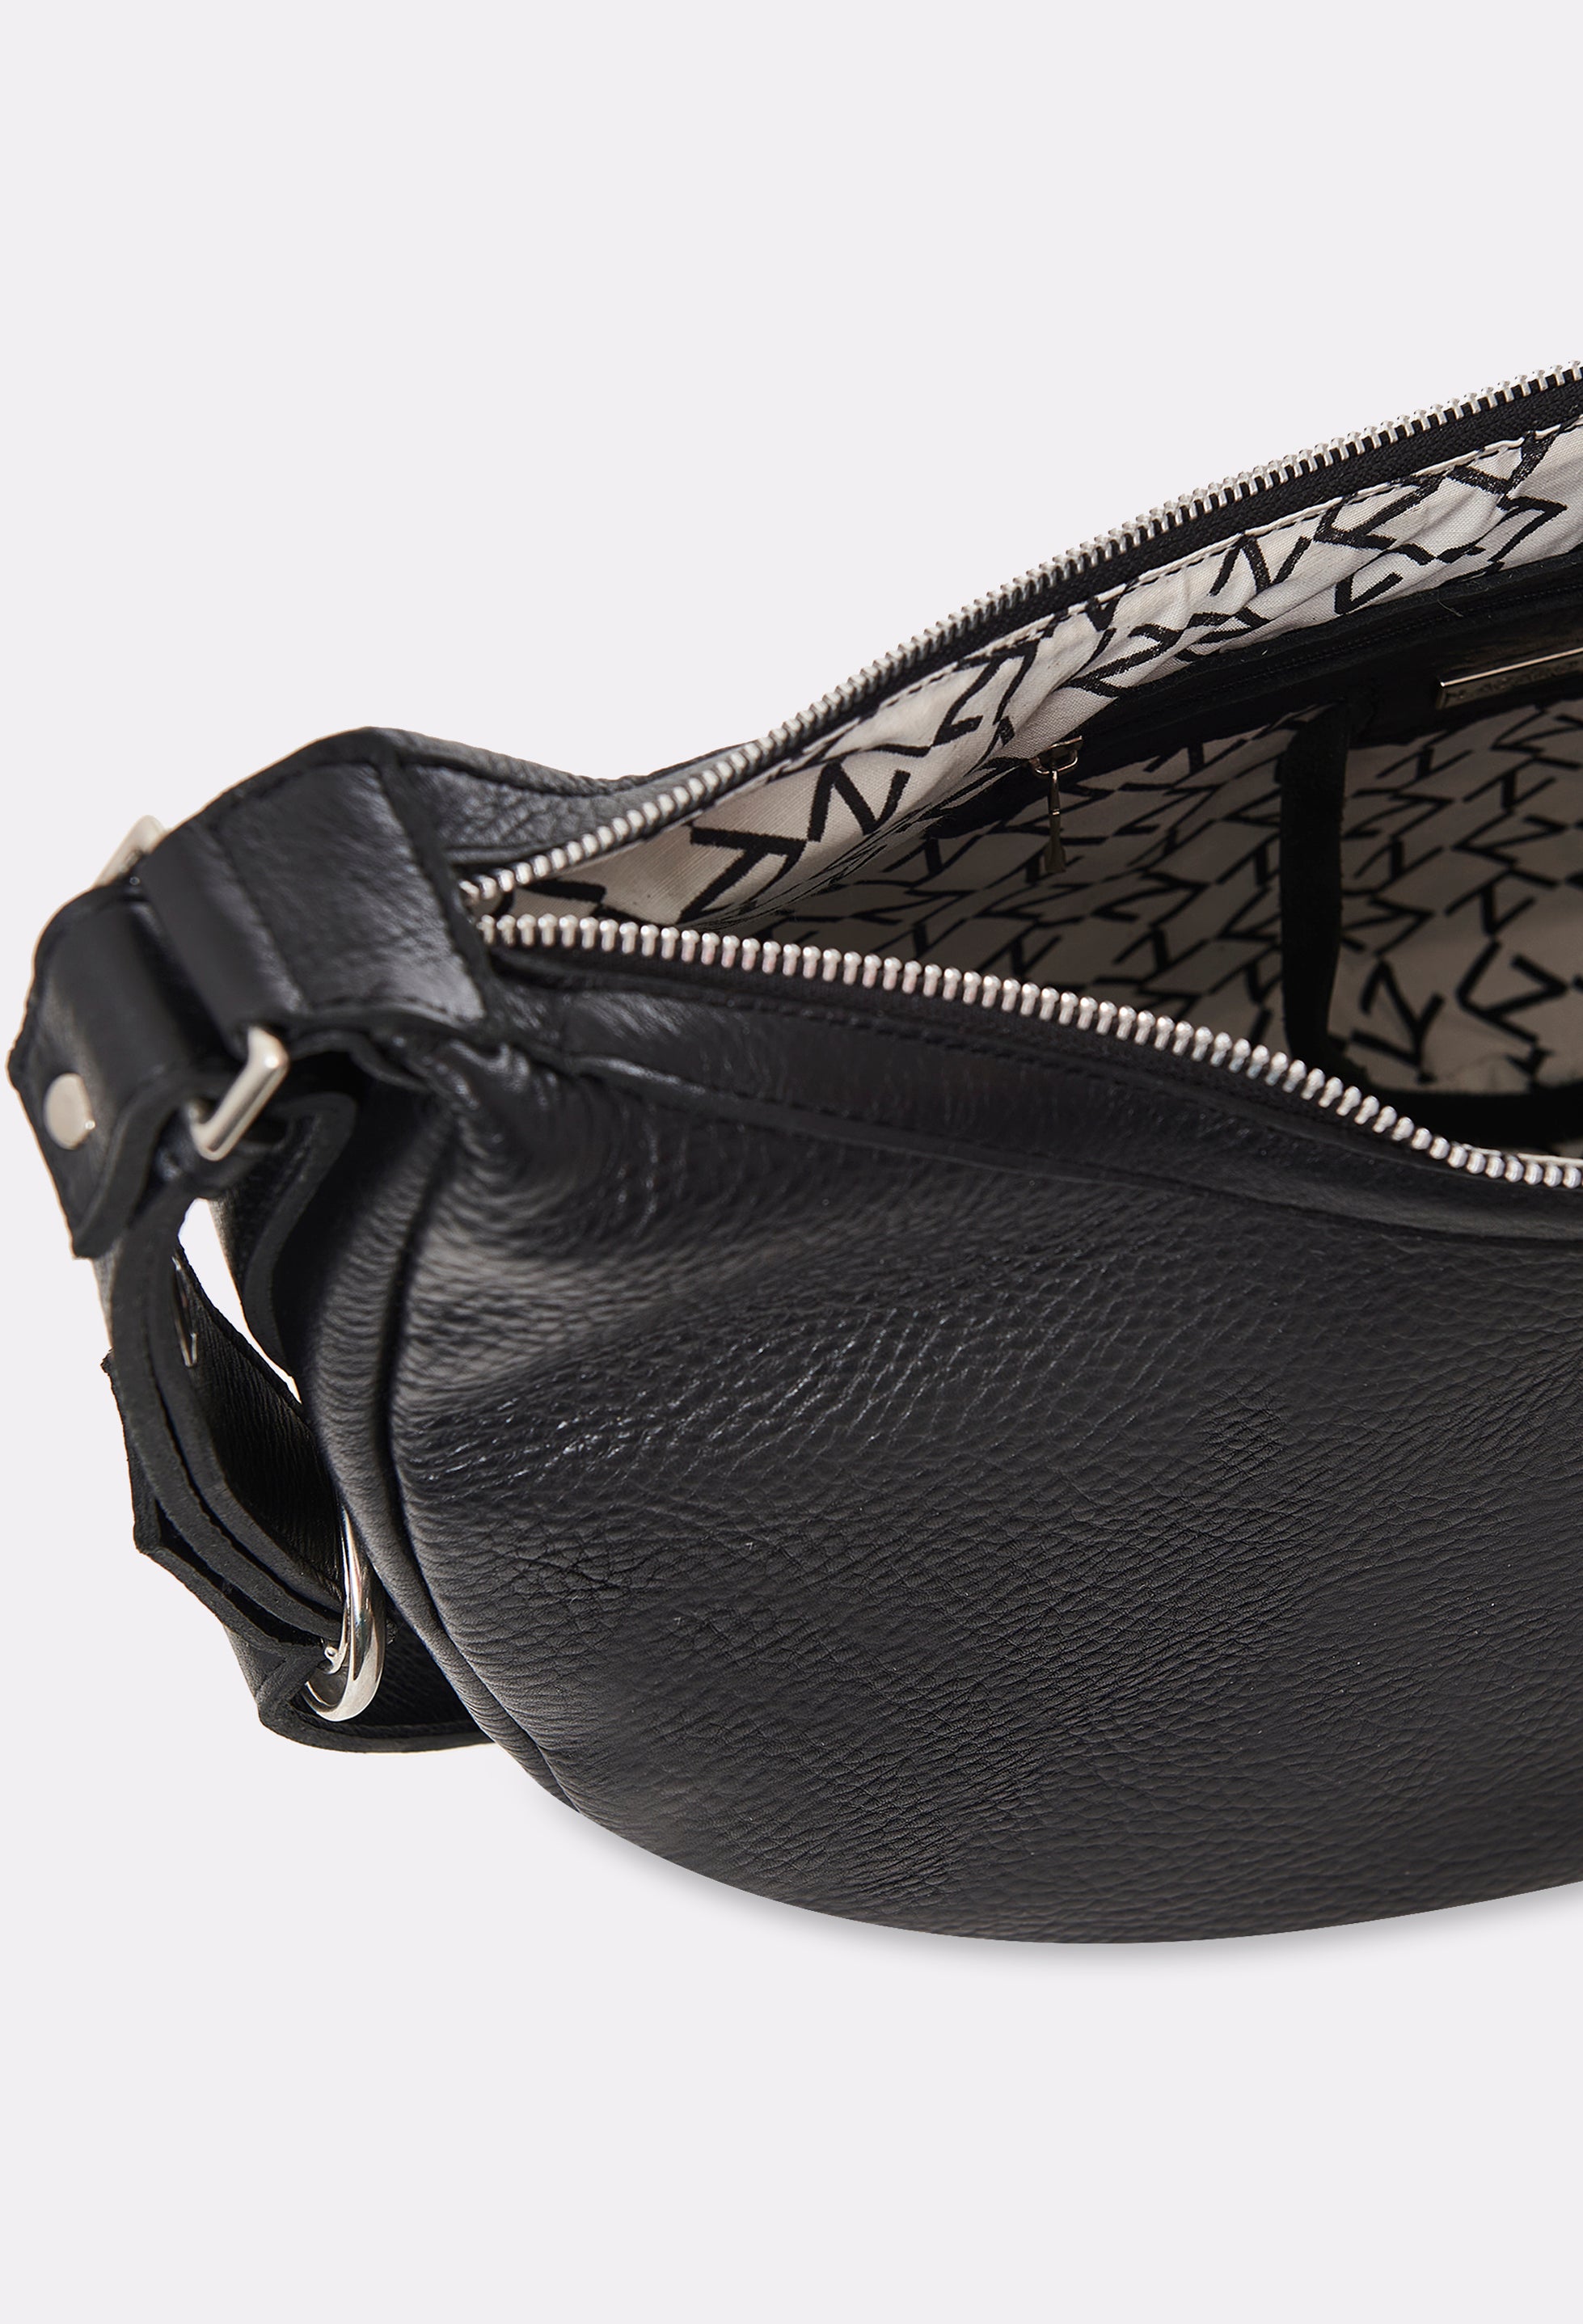 Partial photo of the interior of a Black Leather Crossbody Bag Himalaya with a main zippered compartment with Lazaro patterned lining and an internal zippered pocket.